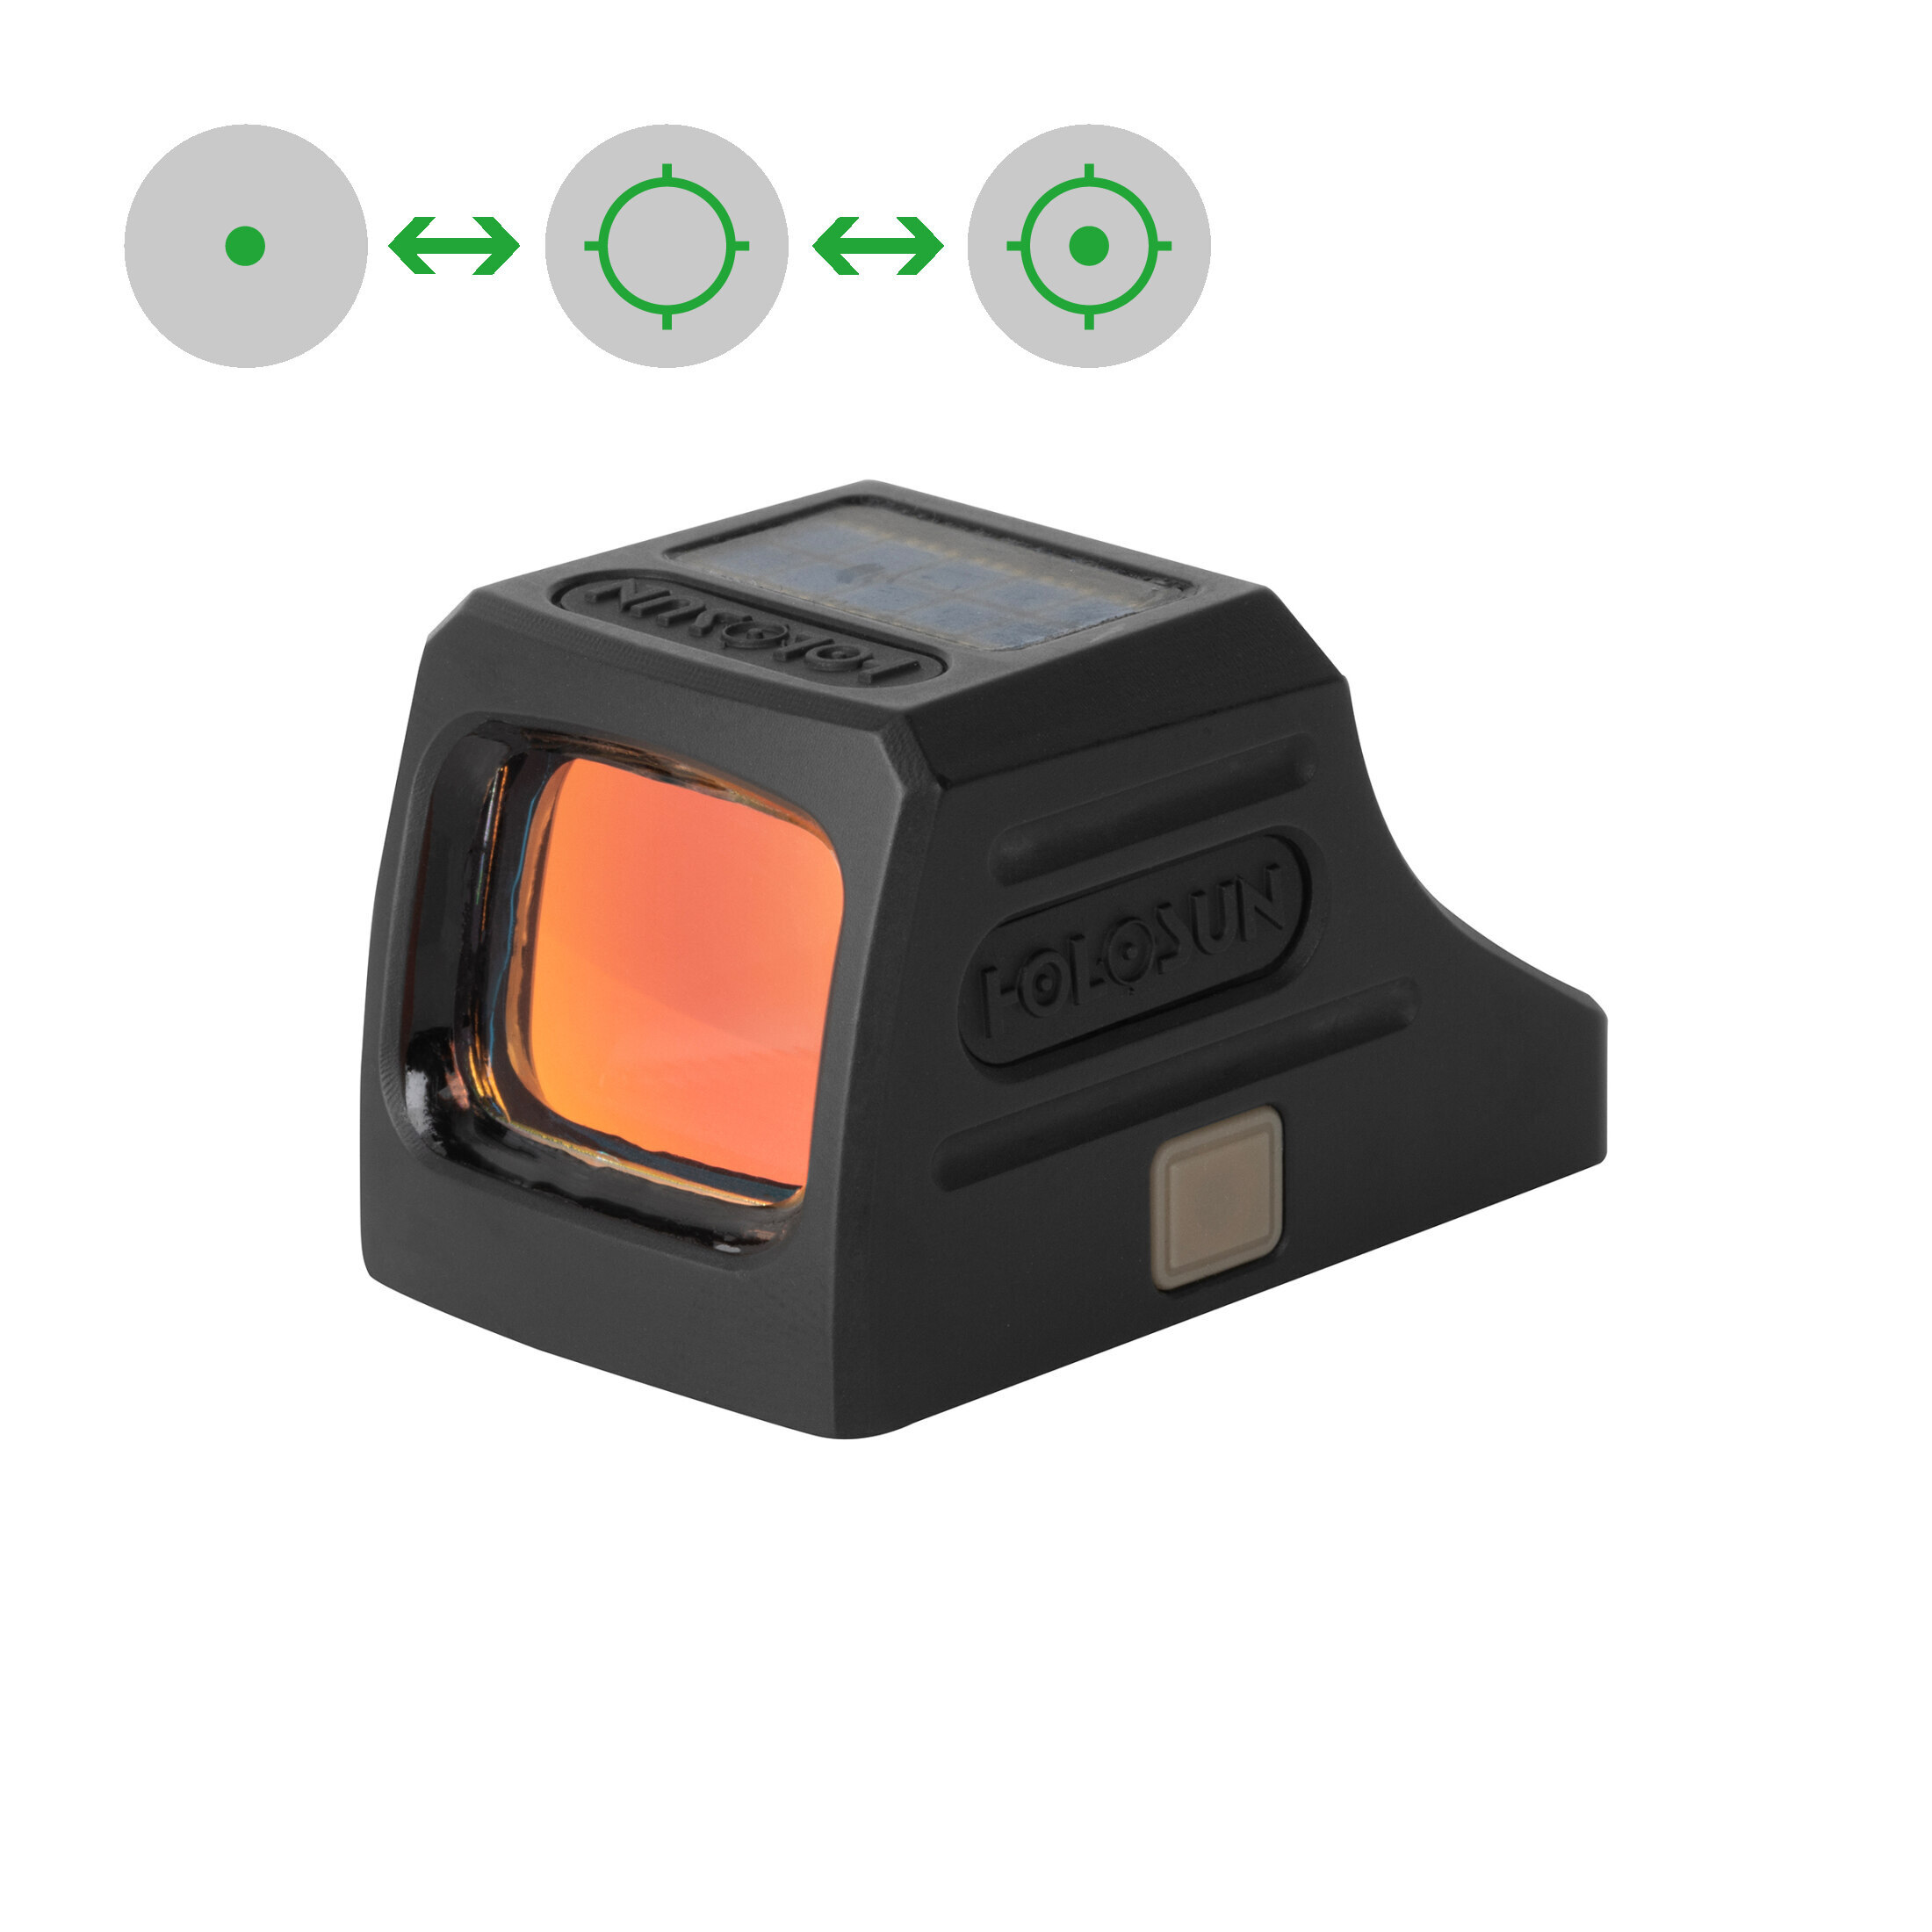 Holosun SCS-CARRY-GR enclosed reflex green dot sight switchable 2MOA dot, 32MOA circle dot reticle …